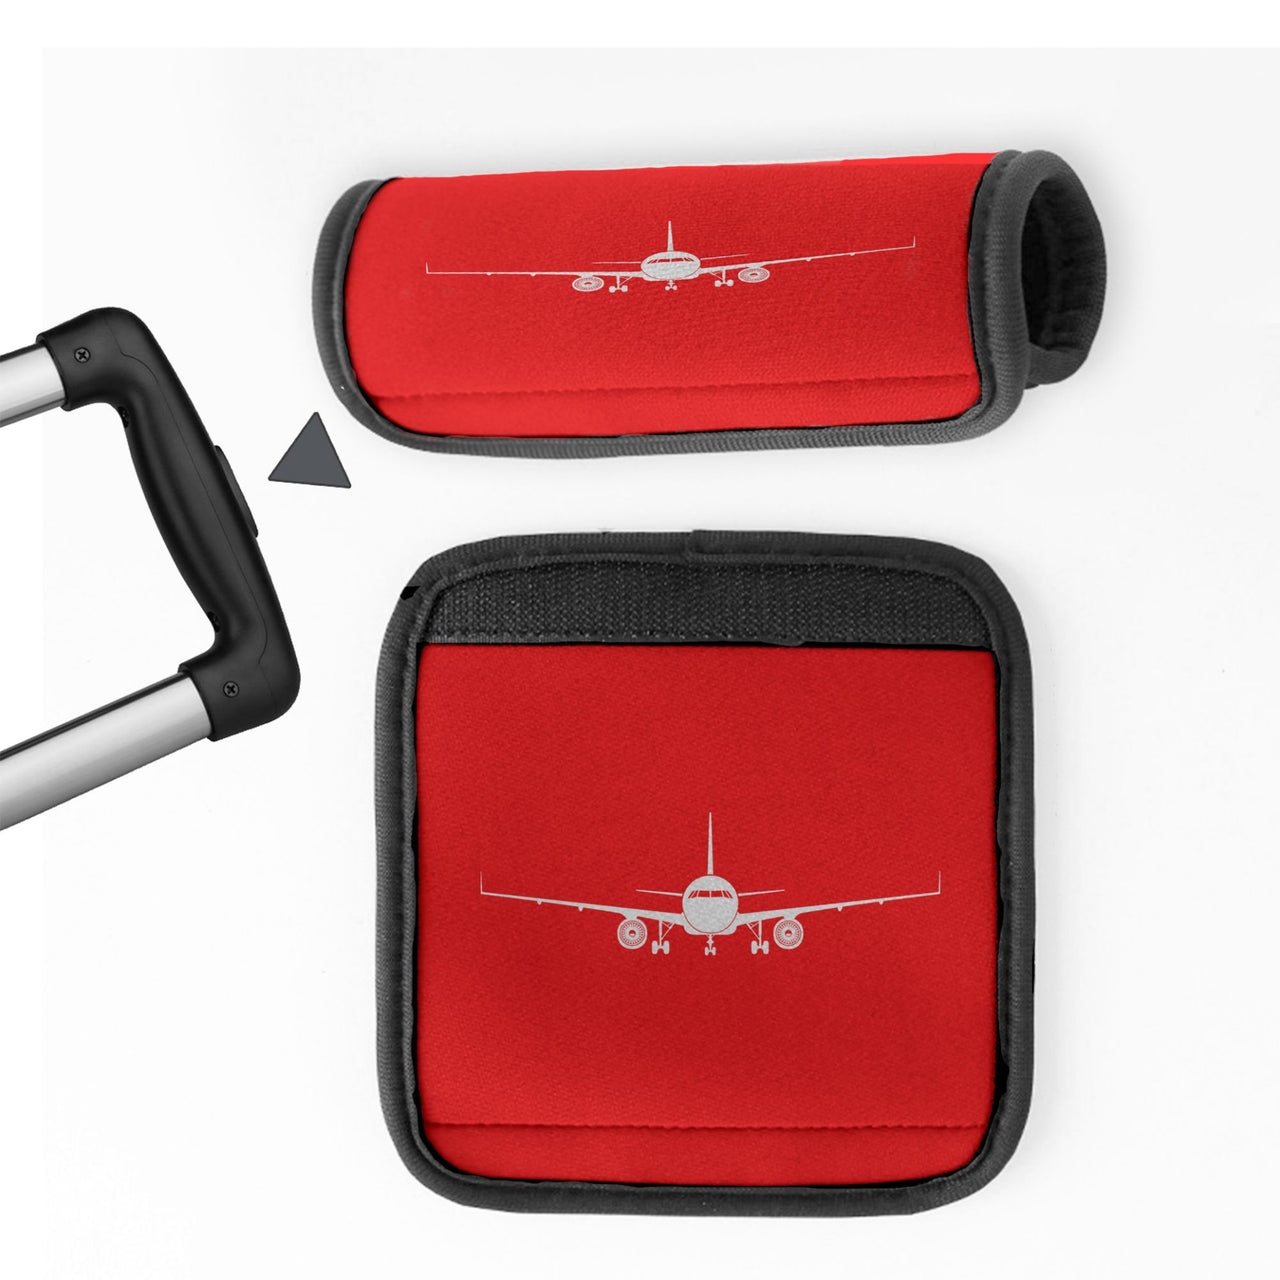 Airbus A320 Silhouette Designed Neoprene Luggage Handle Covers